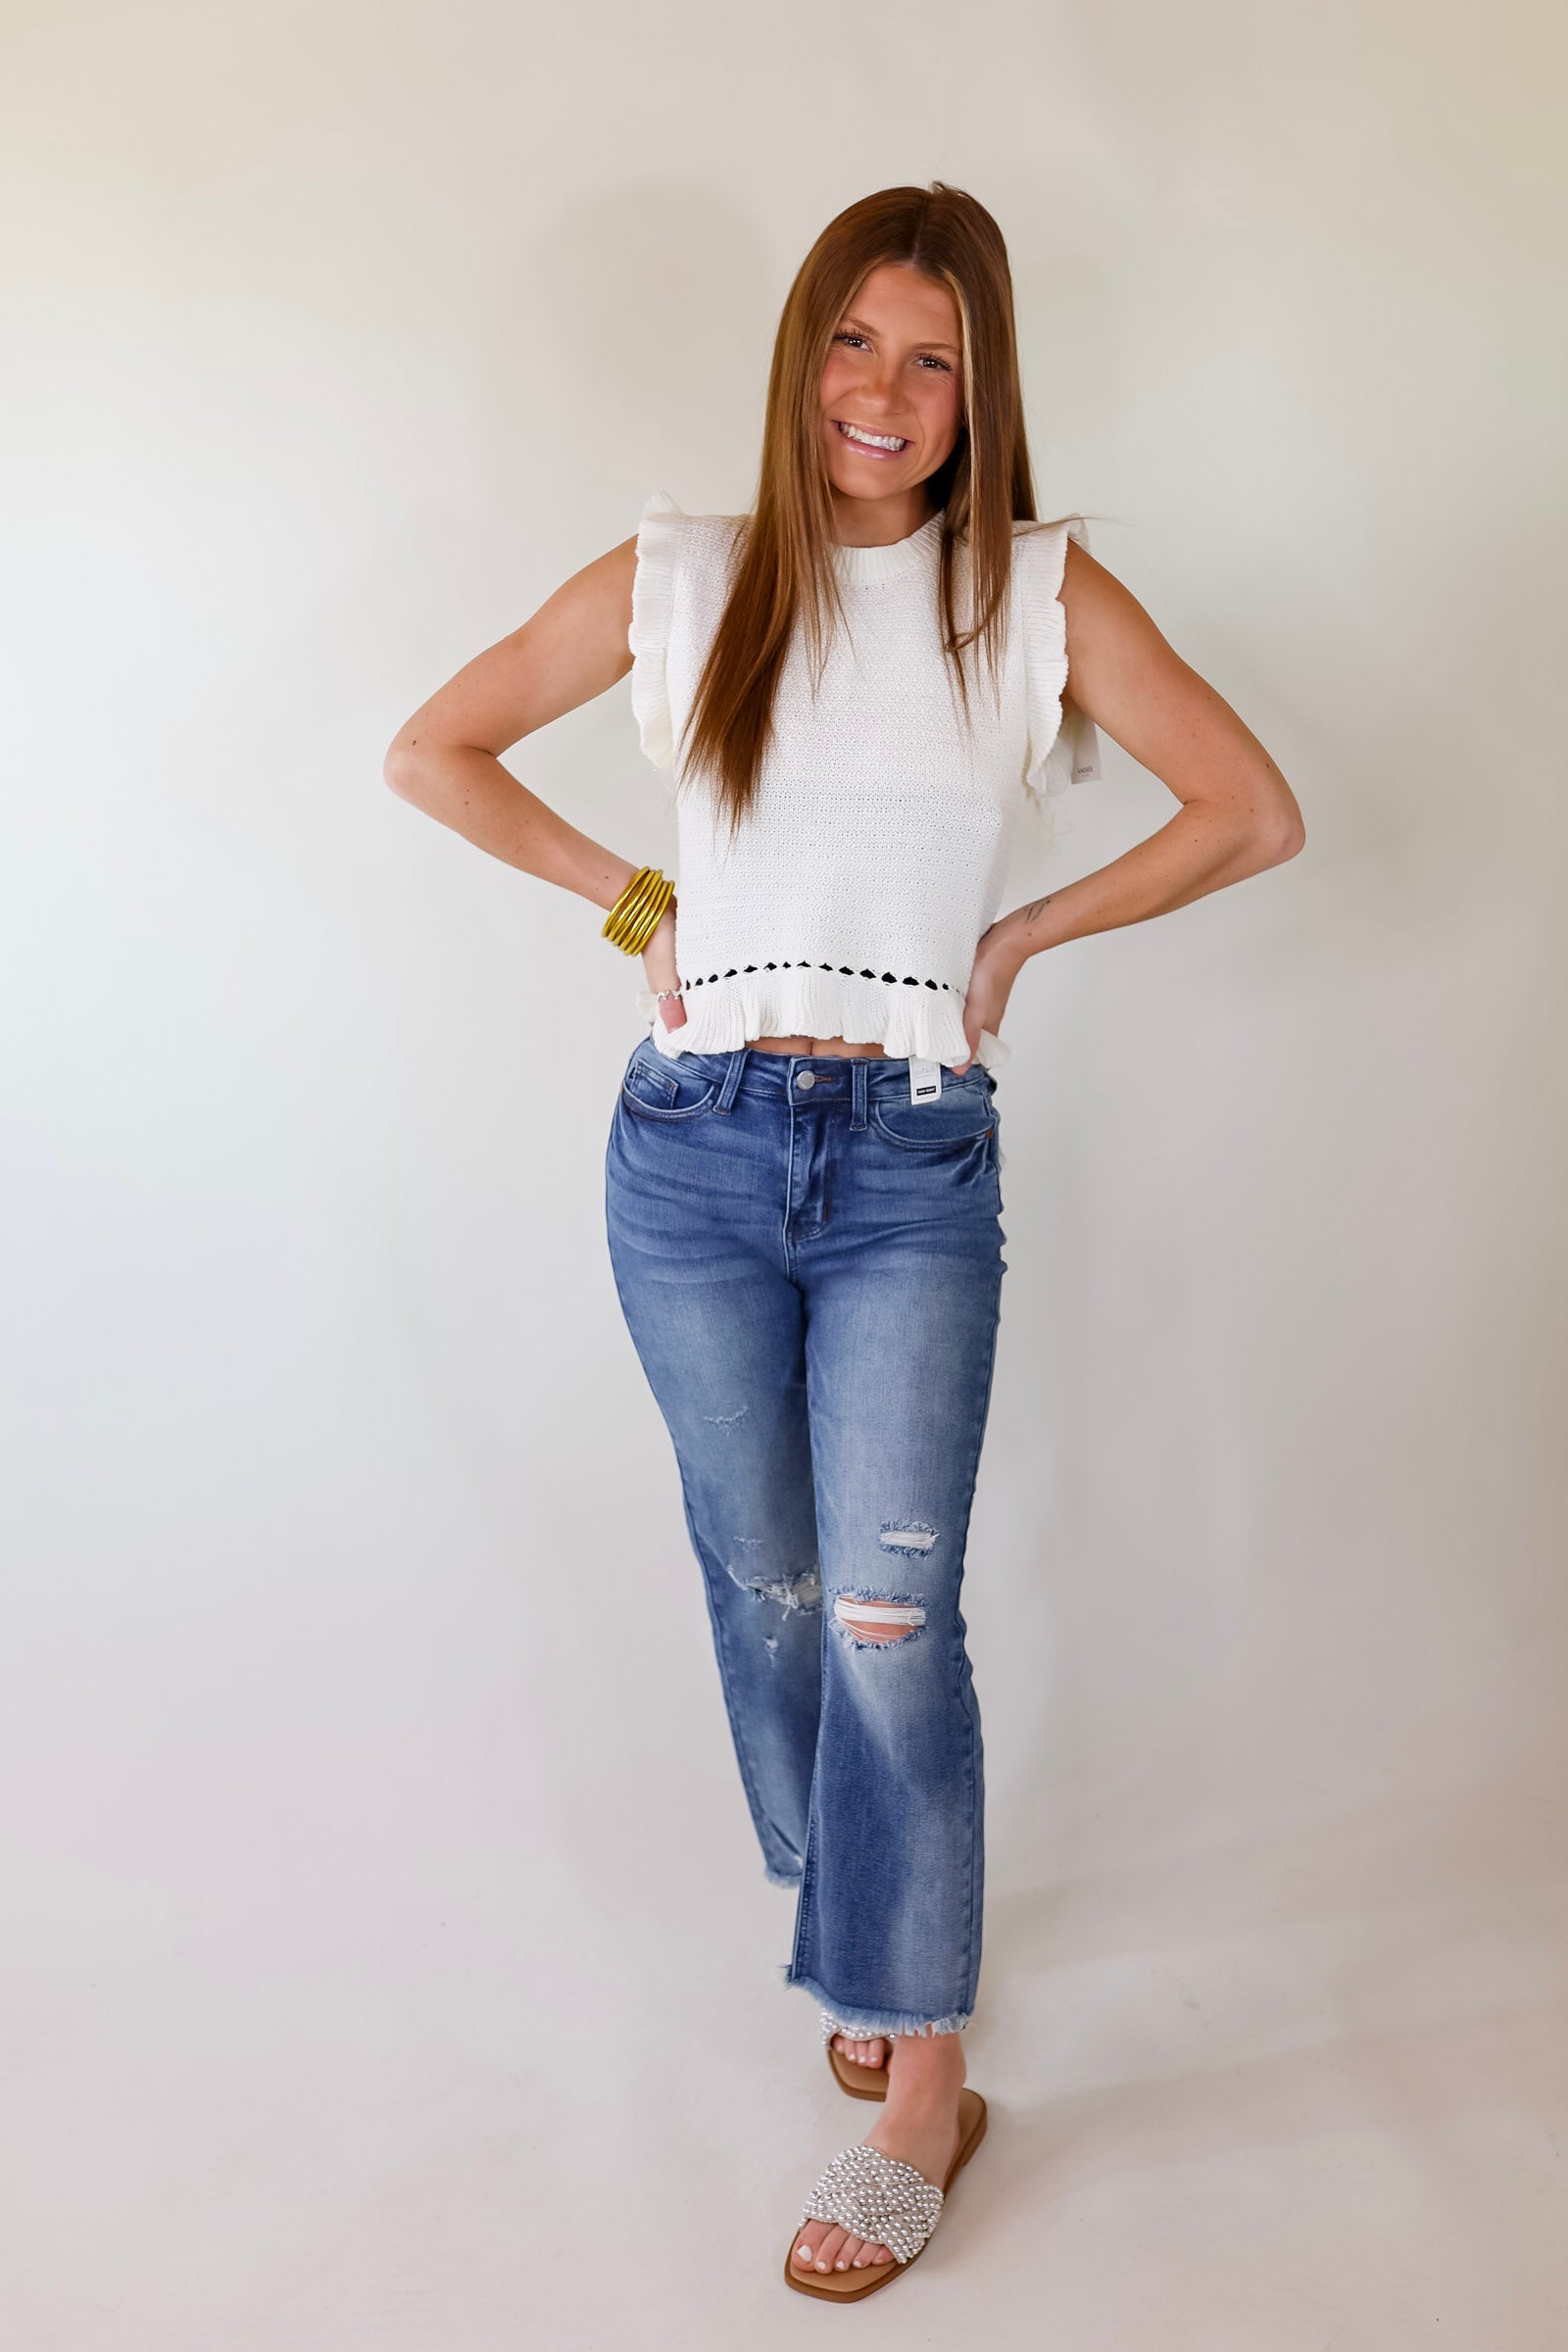 Breezy Baby Cropped Sweater with Ruffle Cap Sleeves in Ivory